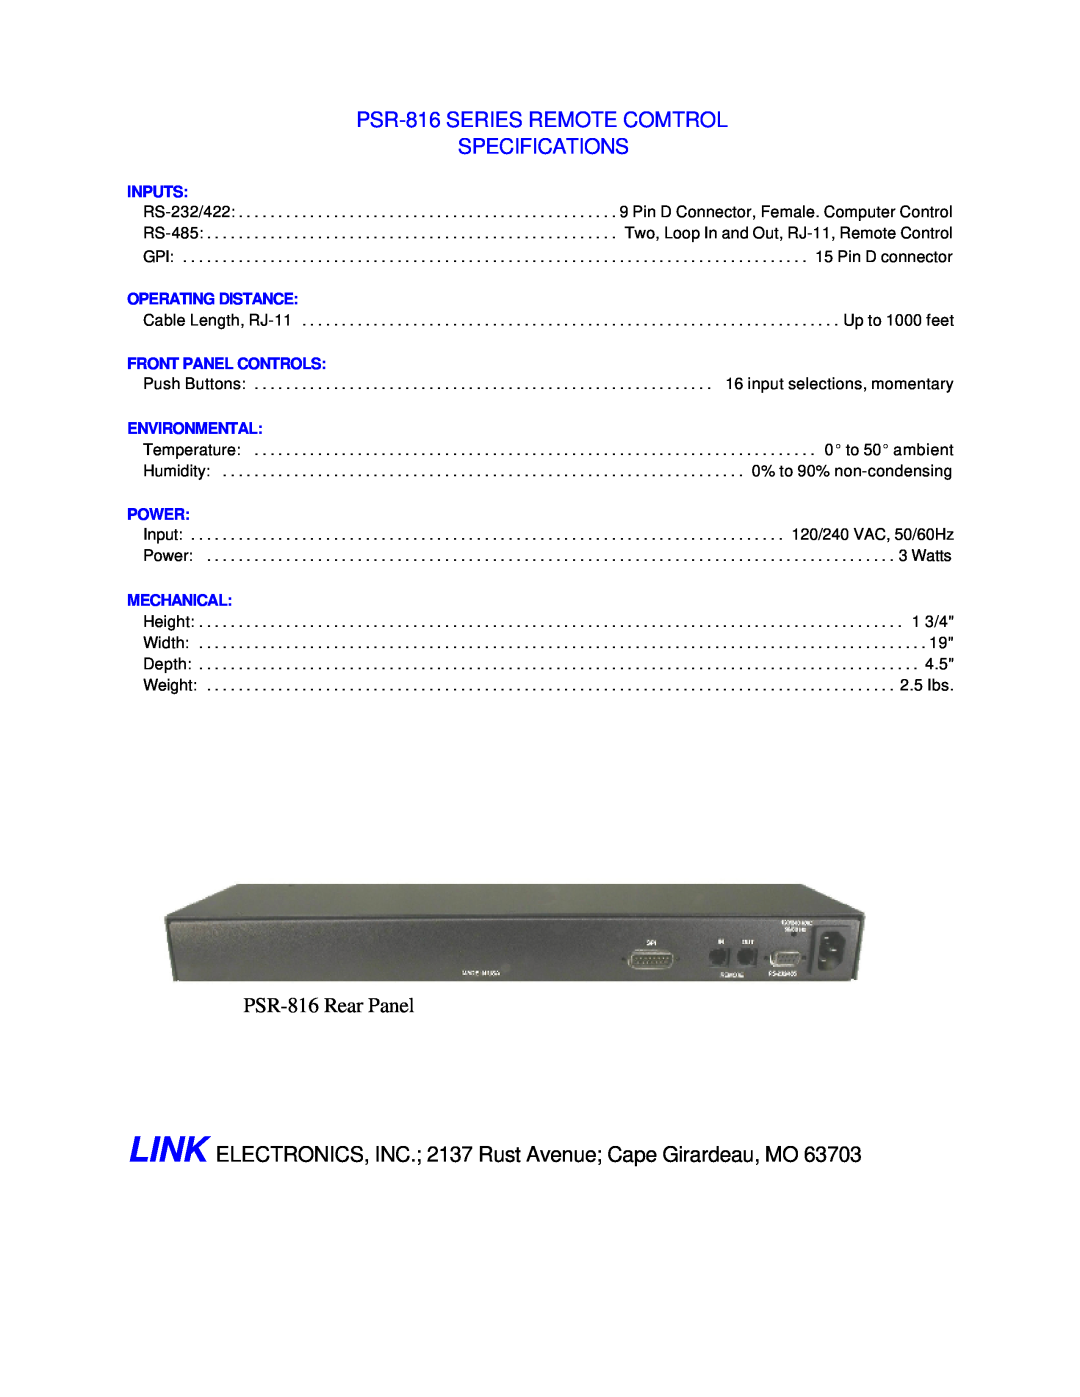 Link electronic PSR-816 warranty Inputs, Operating Distance, Front Panel Controls, Environmental, Power, Mechanical 